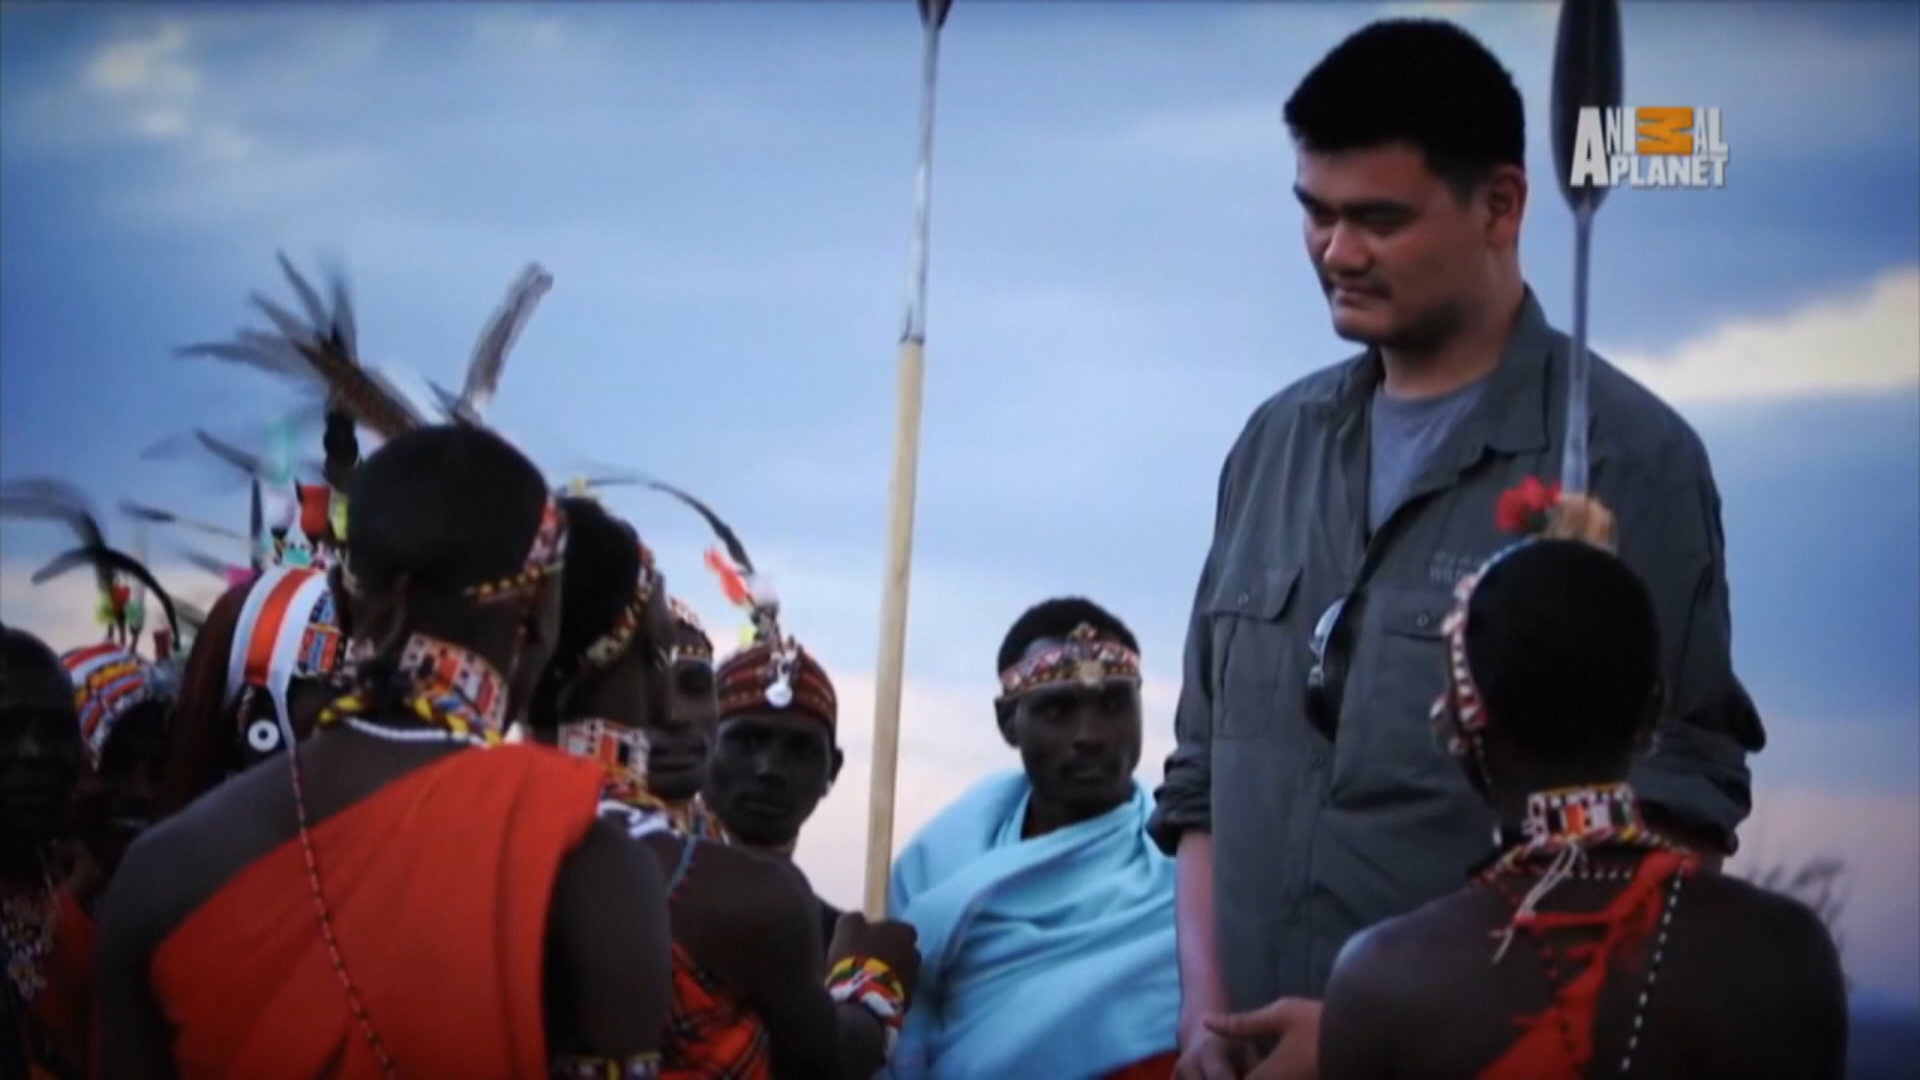 Yao Ming uses his influence as an animal activist